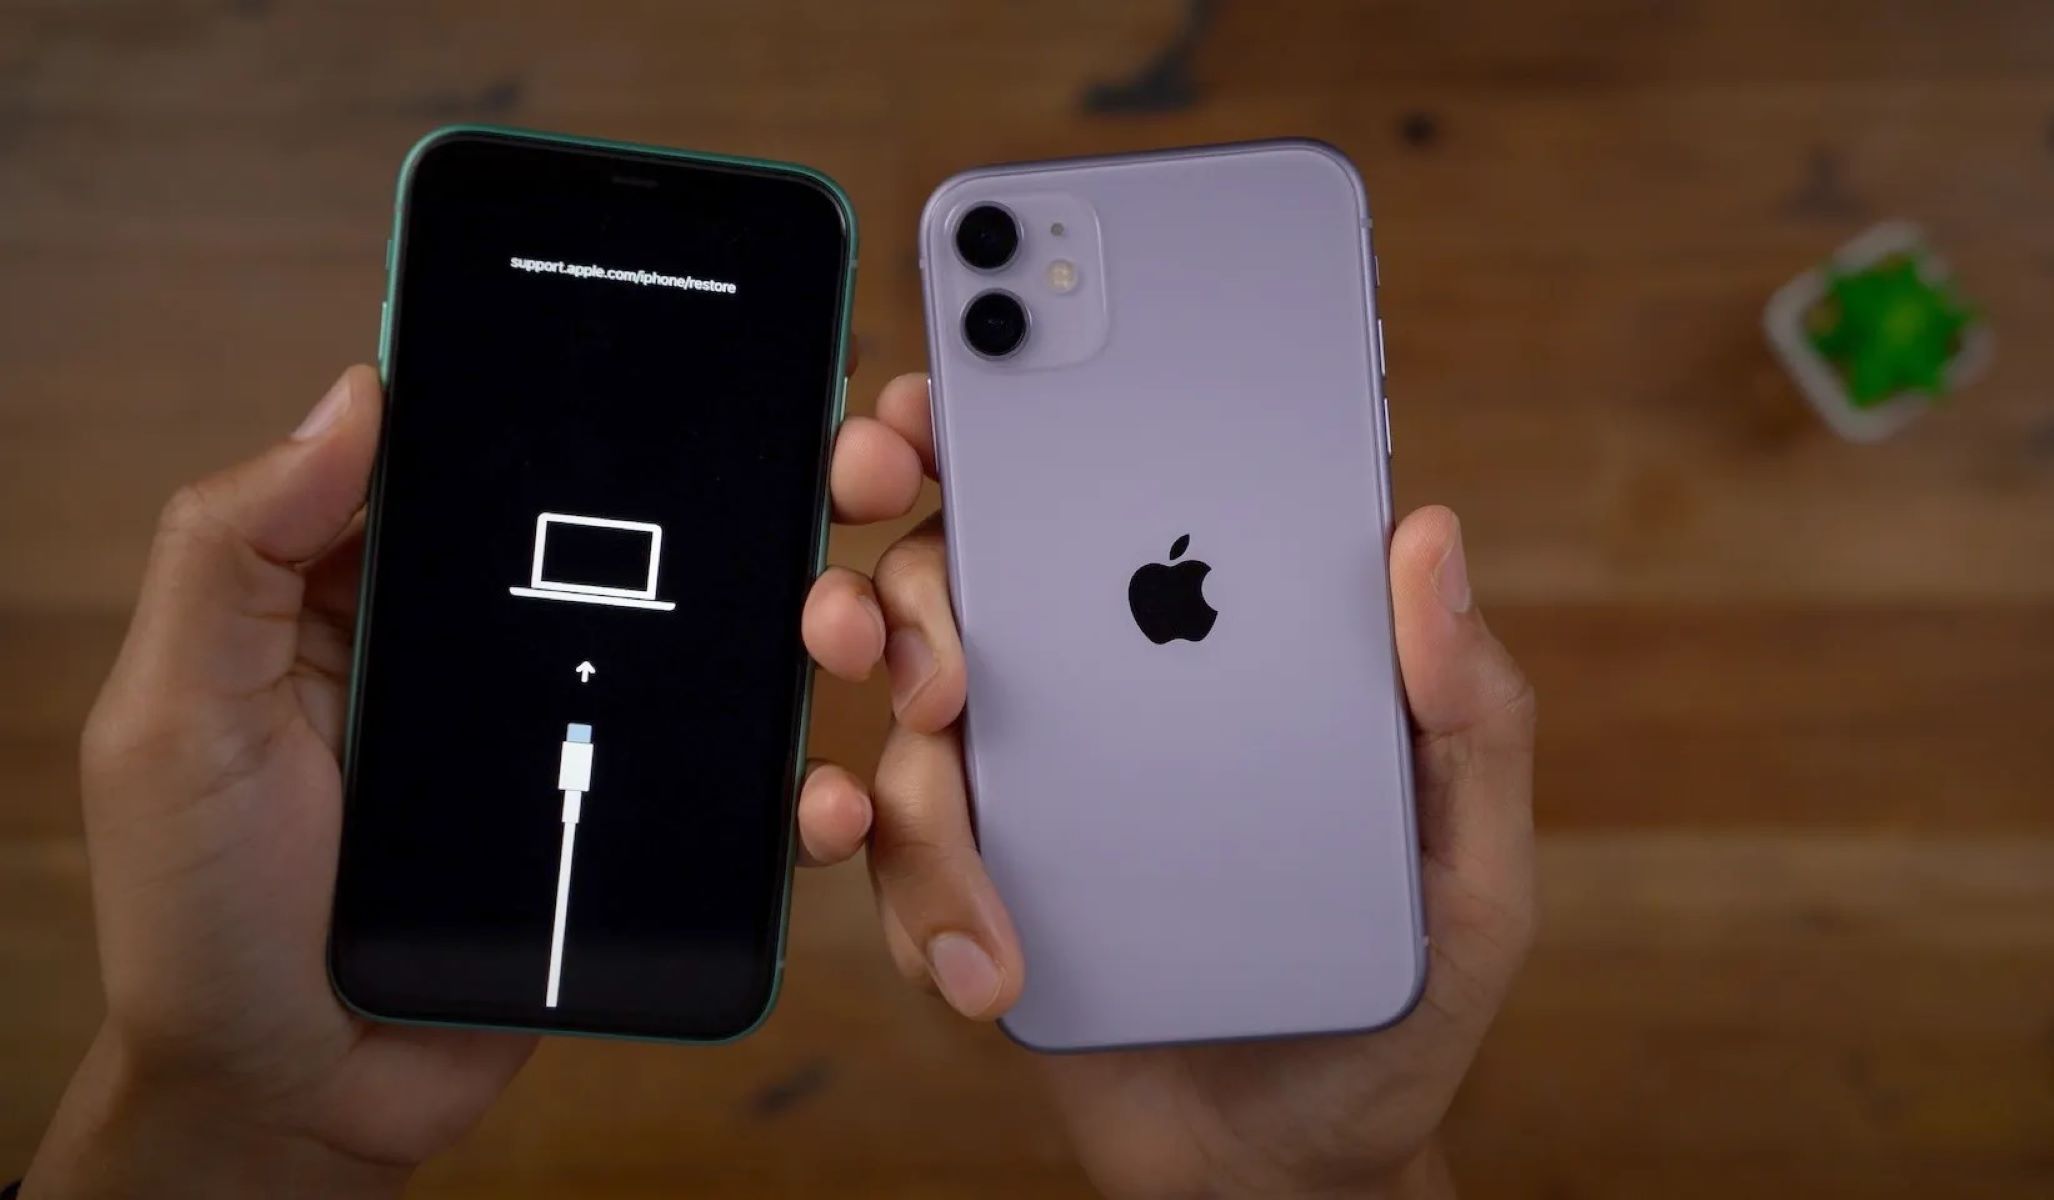 IPhone 11 Recovery Mode: Entering Recovery Mode For Troubleshooting